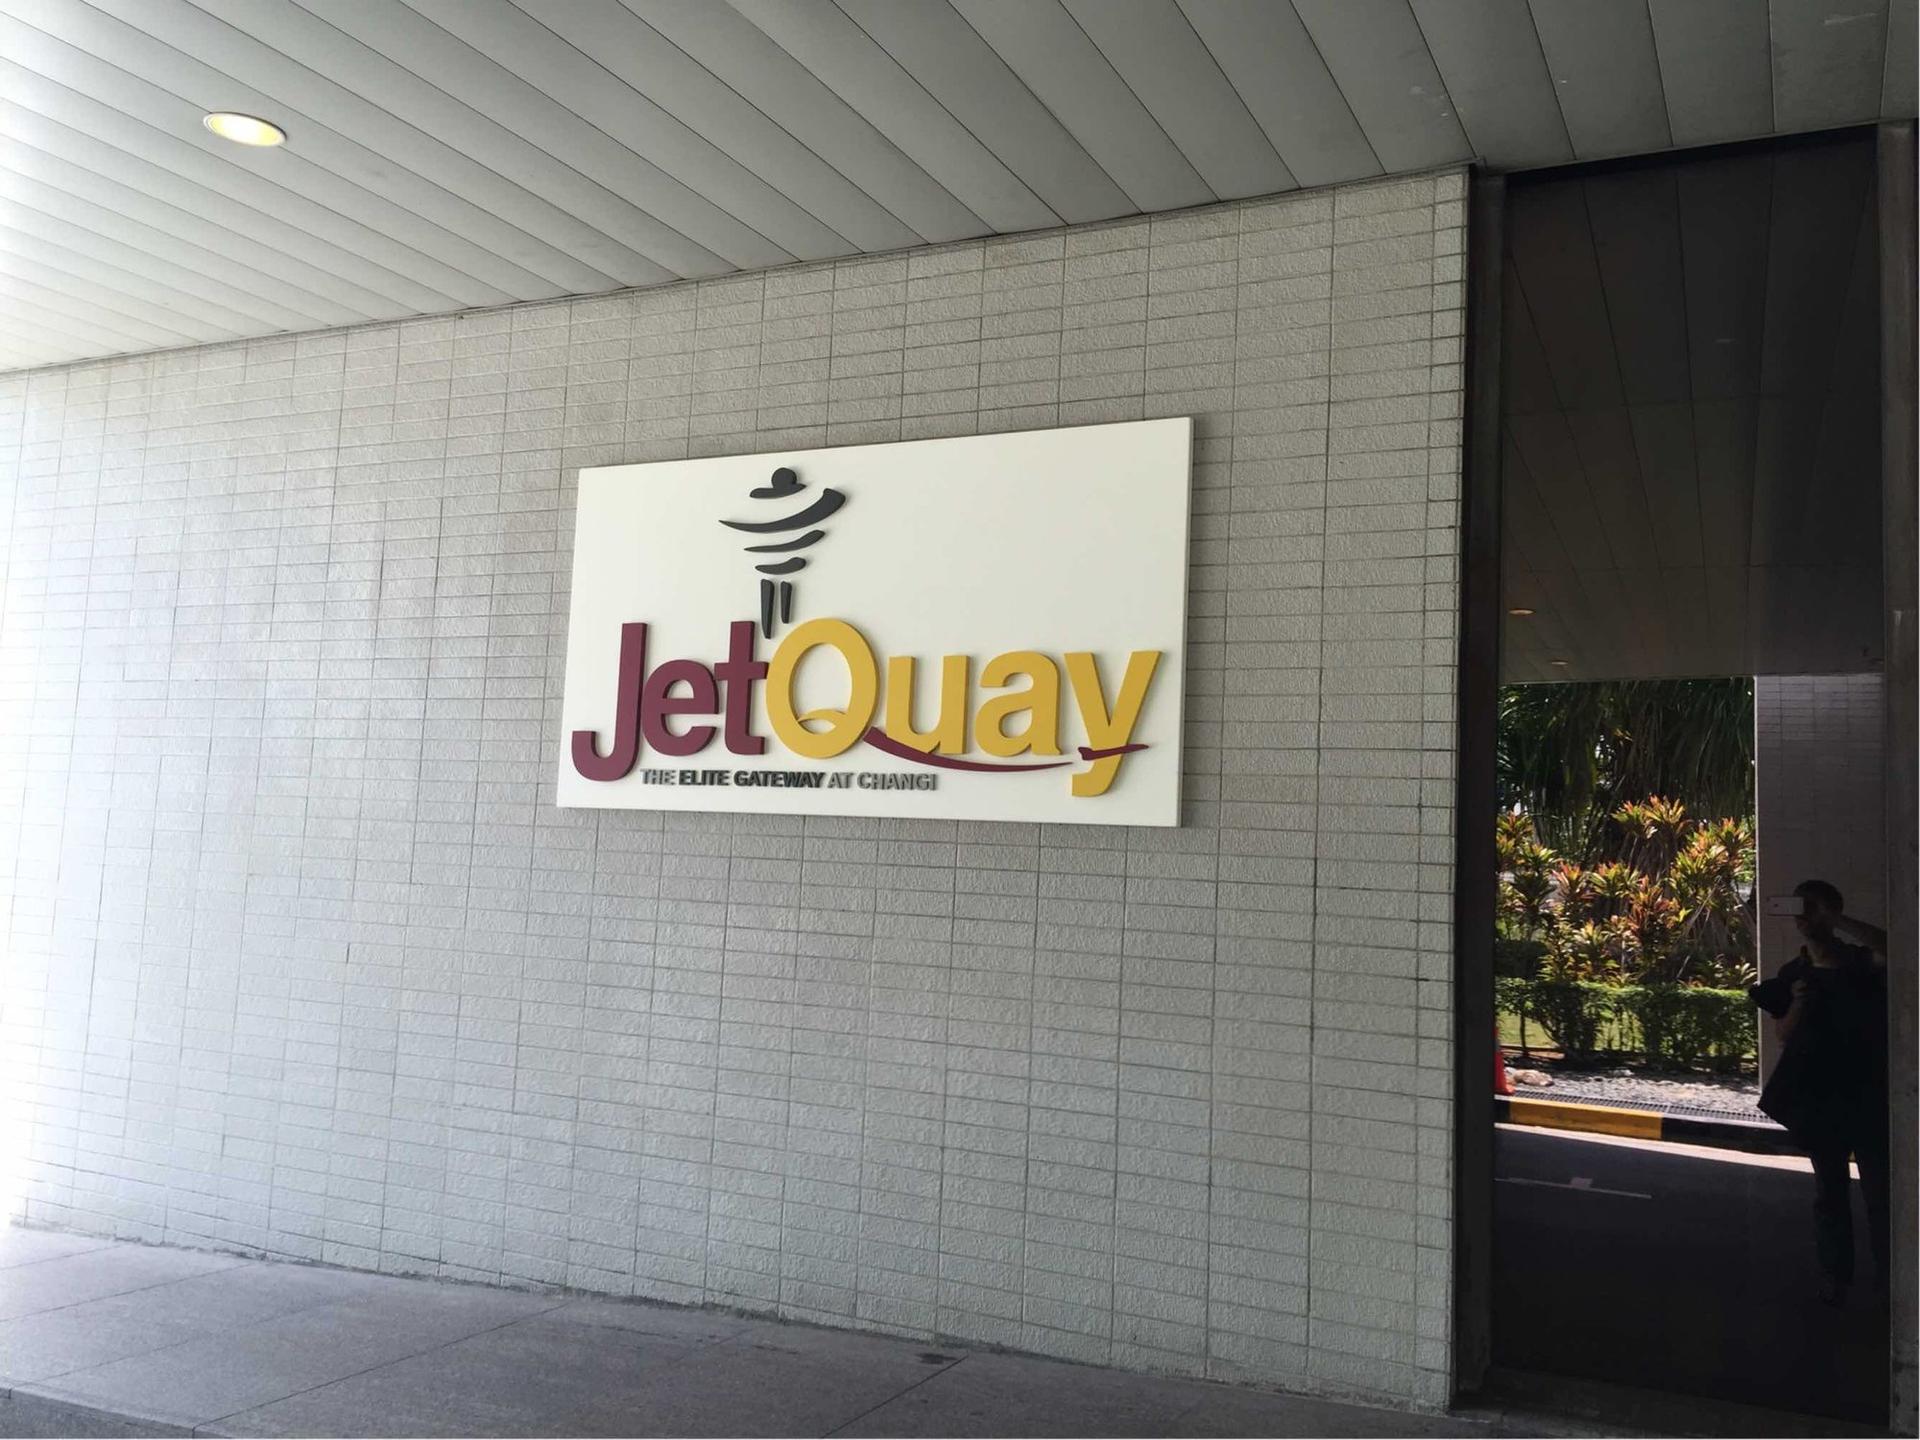 JetQuay CIP Terminal Lounge image 7 of 7